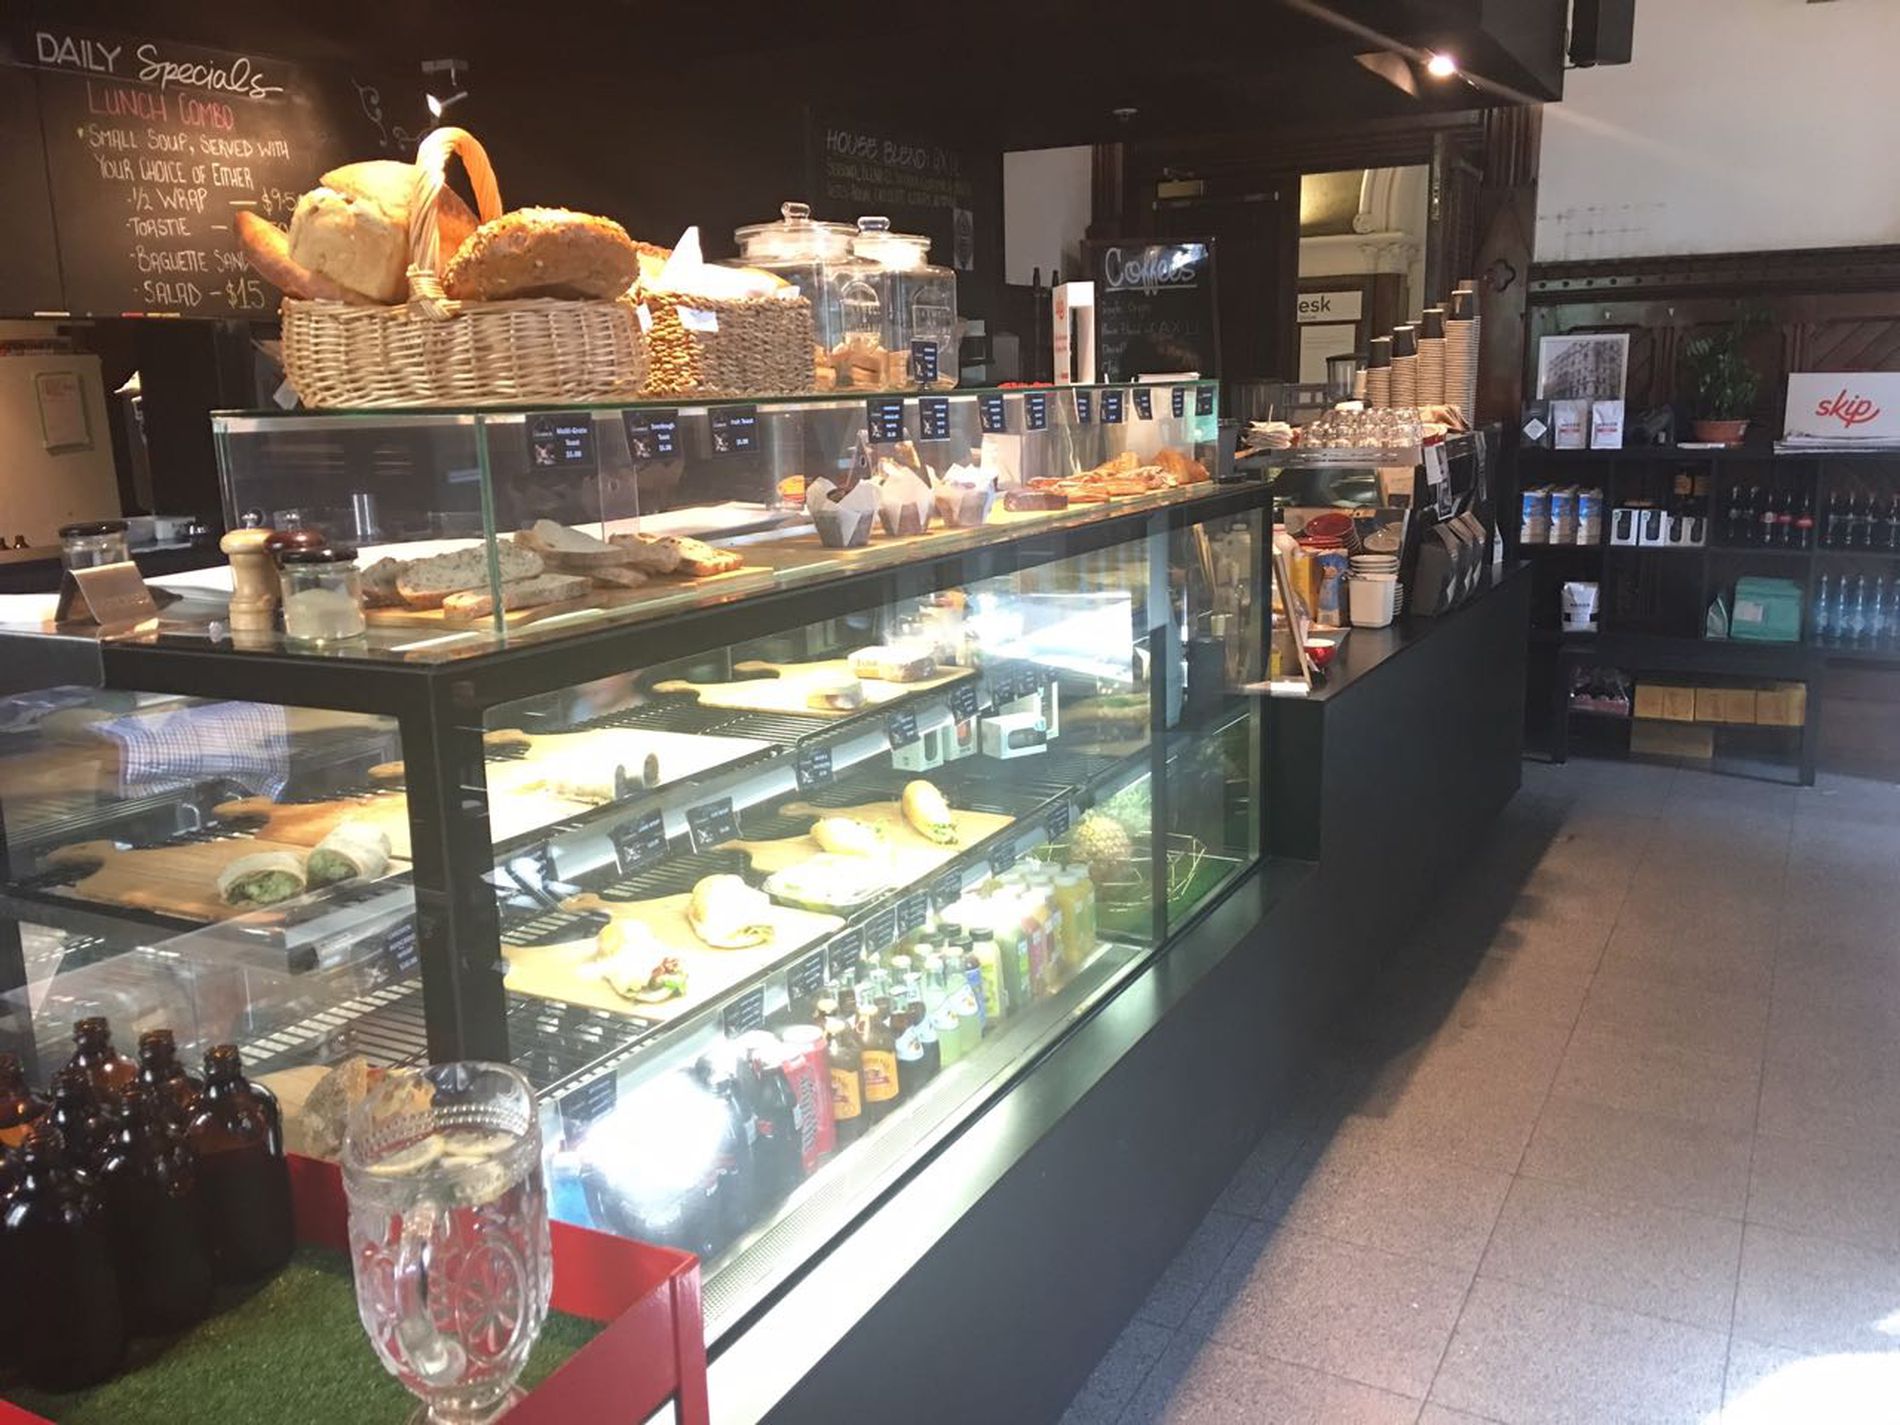 SOLD - 5 Day Cafe Business For Sale Melbourne CBD